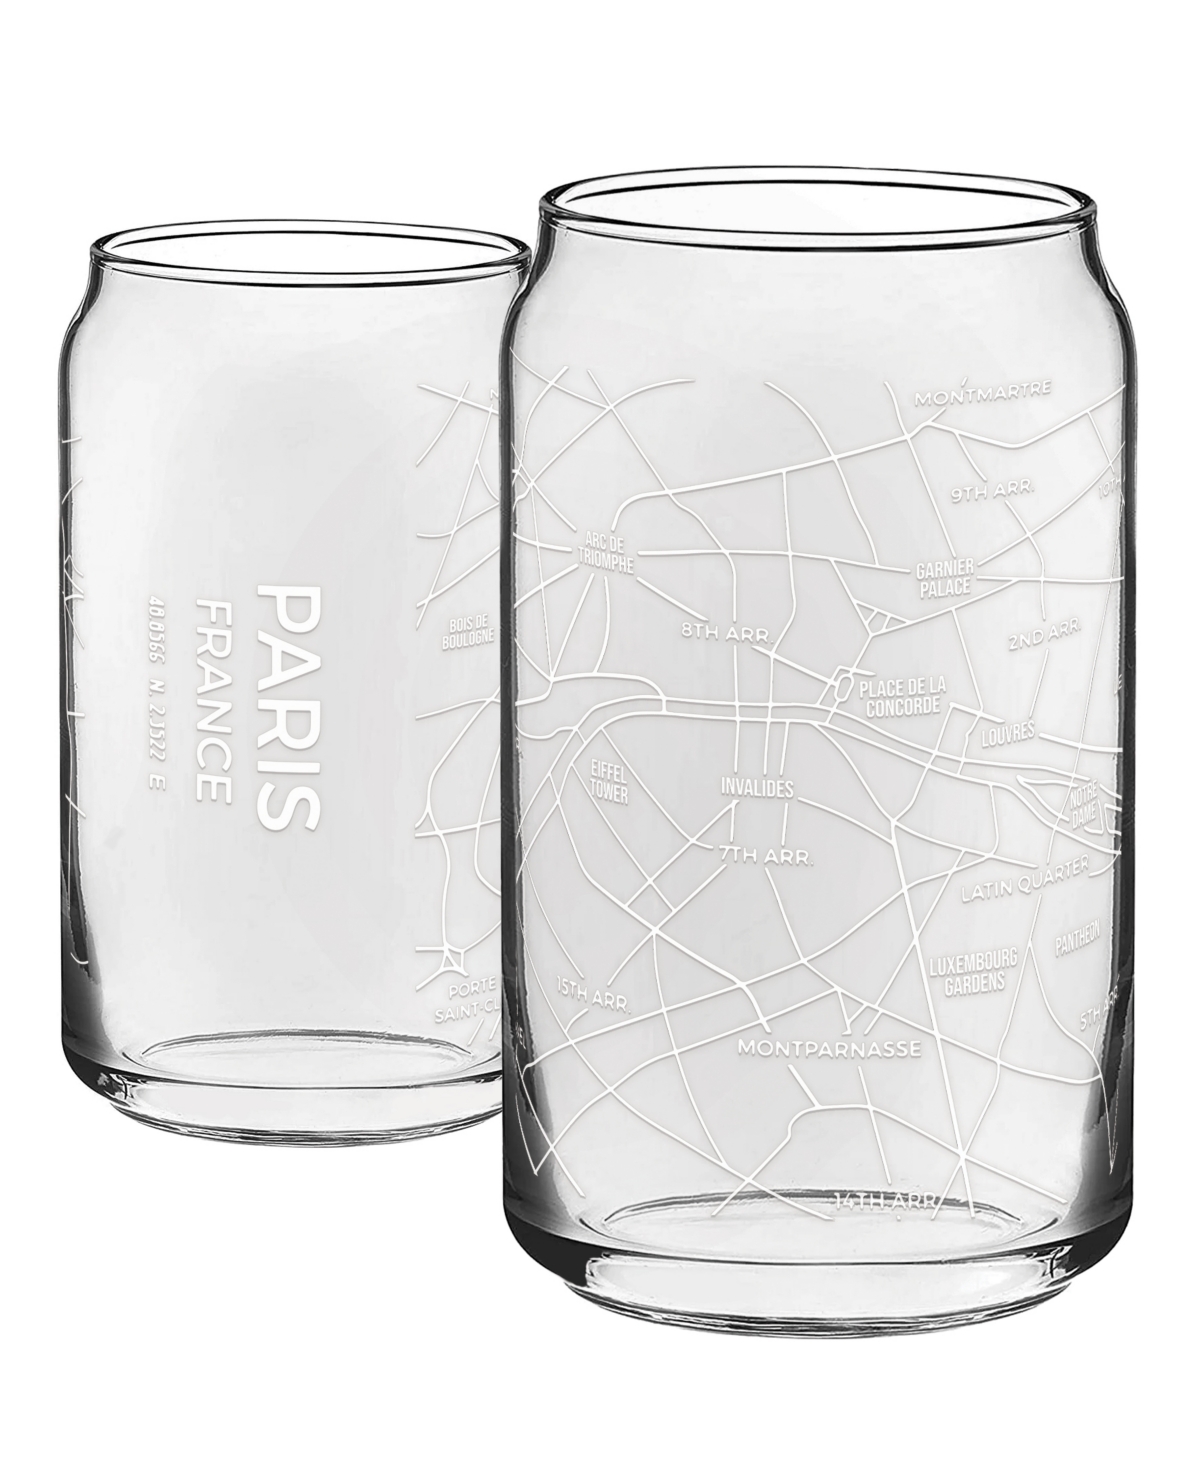 Narbo The Can Paris Map 16 oz Everyday Glassware, Set Of 2 In White